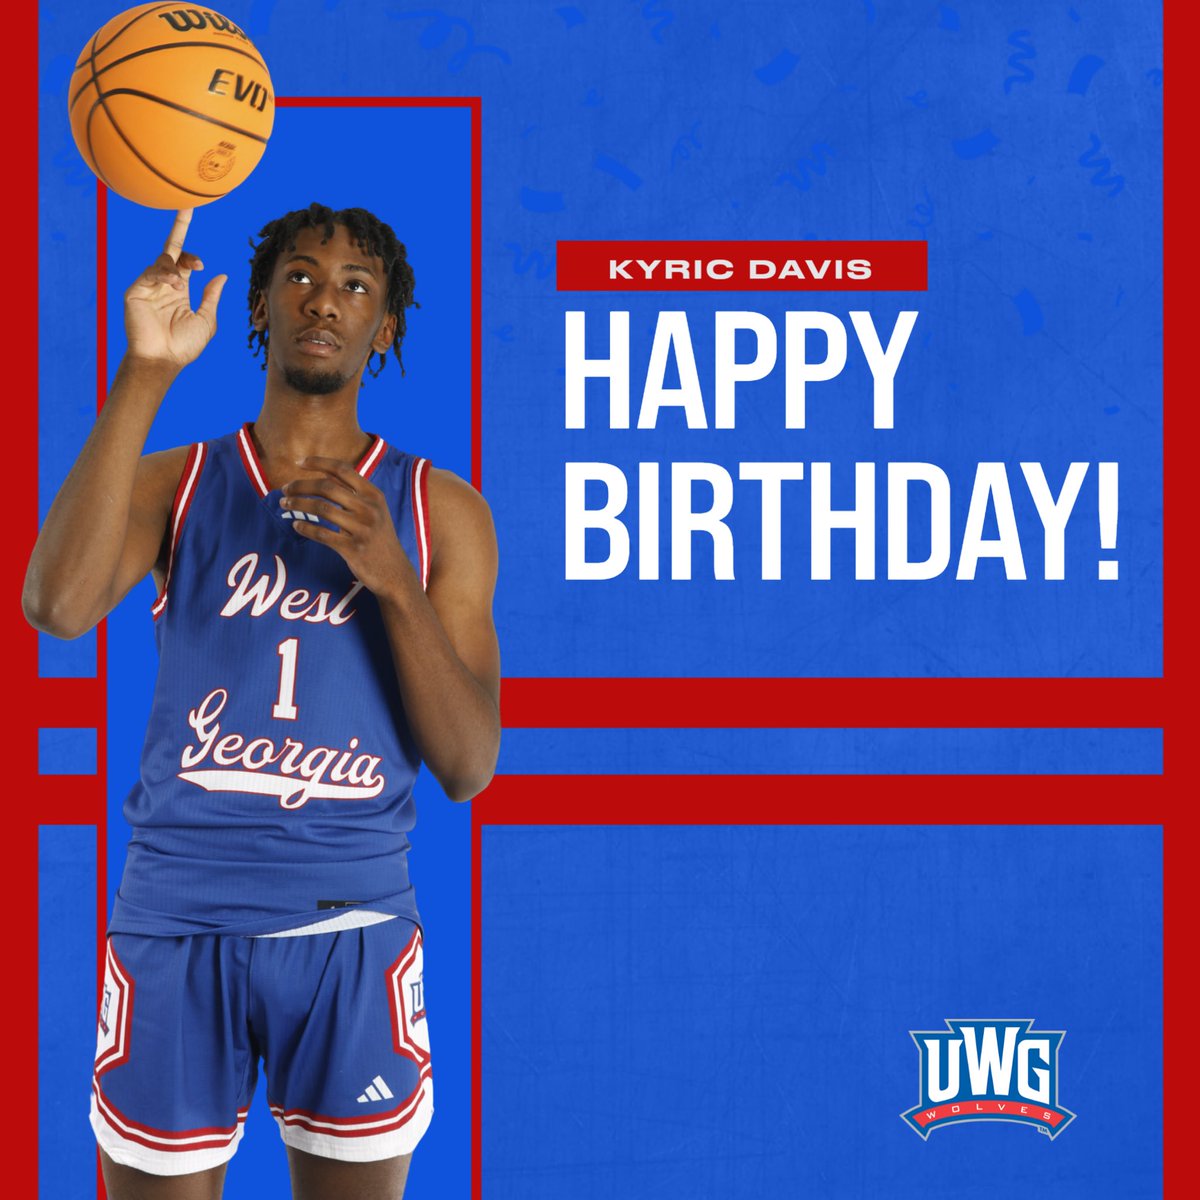 Graduated from South Georgia State yesterday and now celebrates his birthday today! Join us in wishing Kyric a happy birthday! 🐺🐺 #WeRunTogether